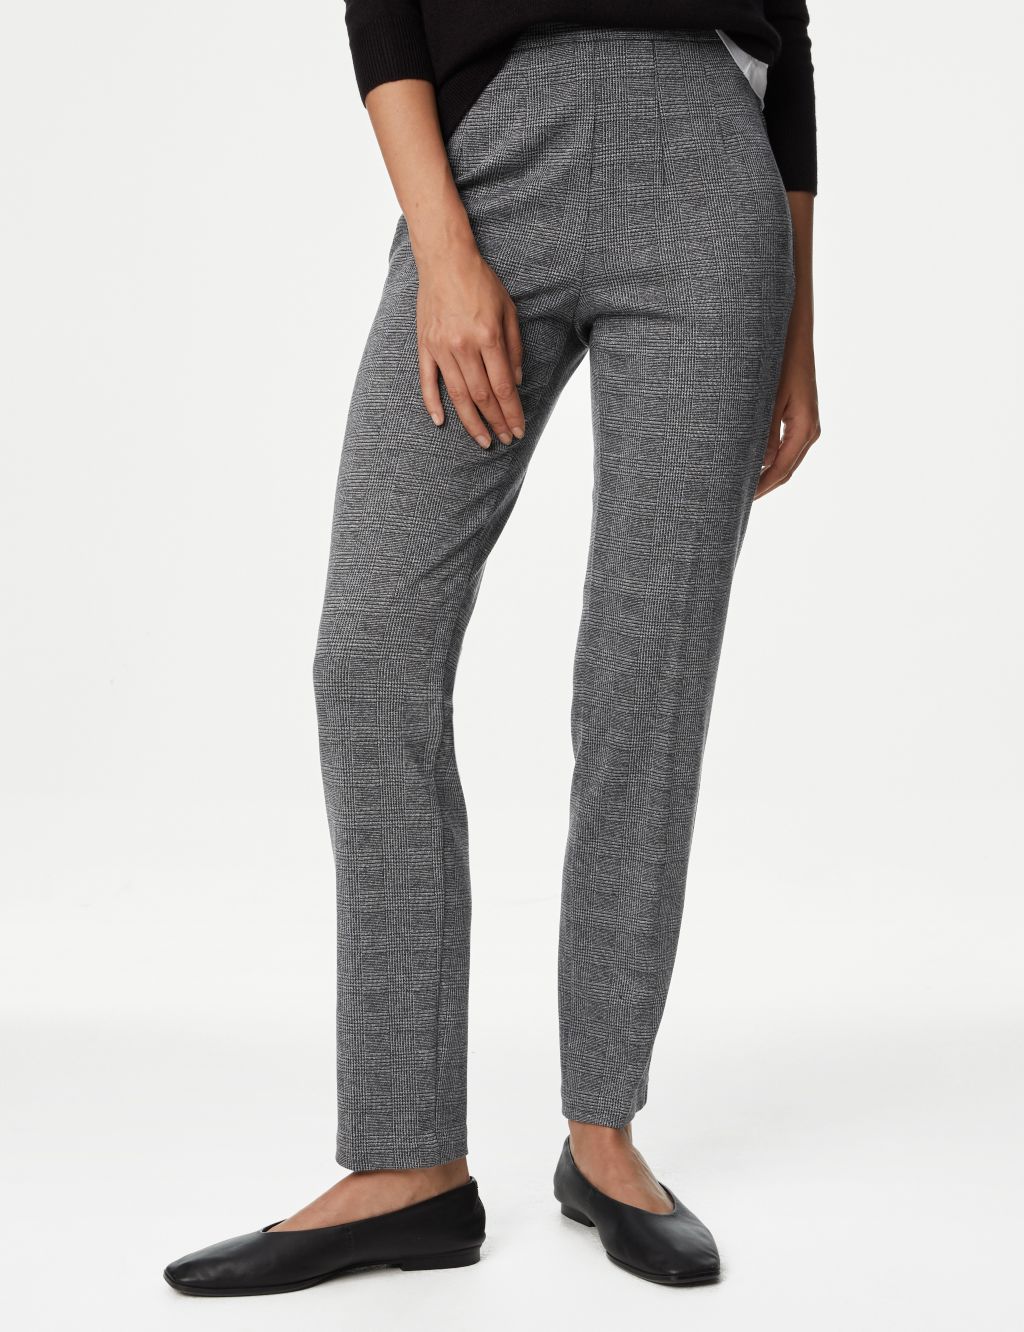 Jersey Checked Slim Fit Trousers | M&S Collection | M&S